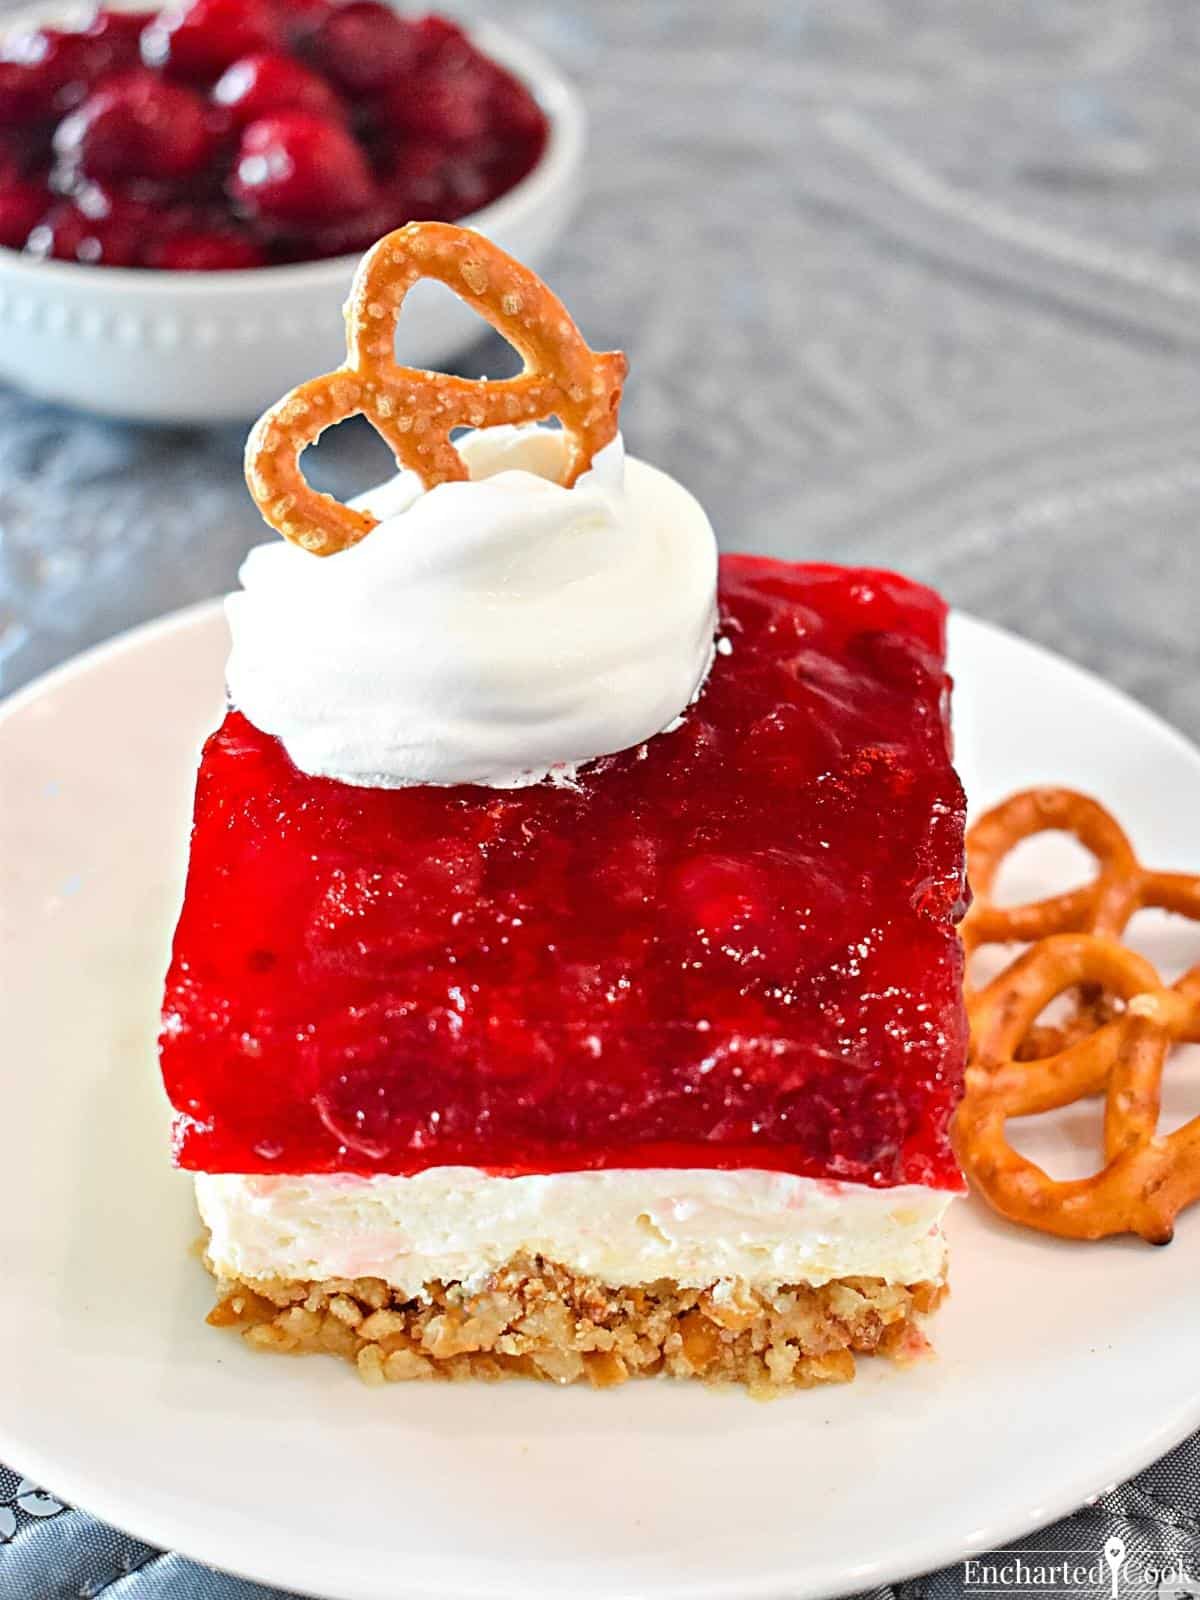 The cheesecake dessert on a plate and garnished with whipped topping and a small pretzel.